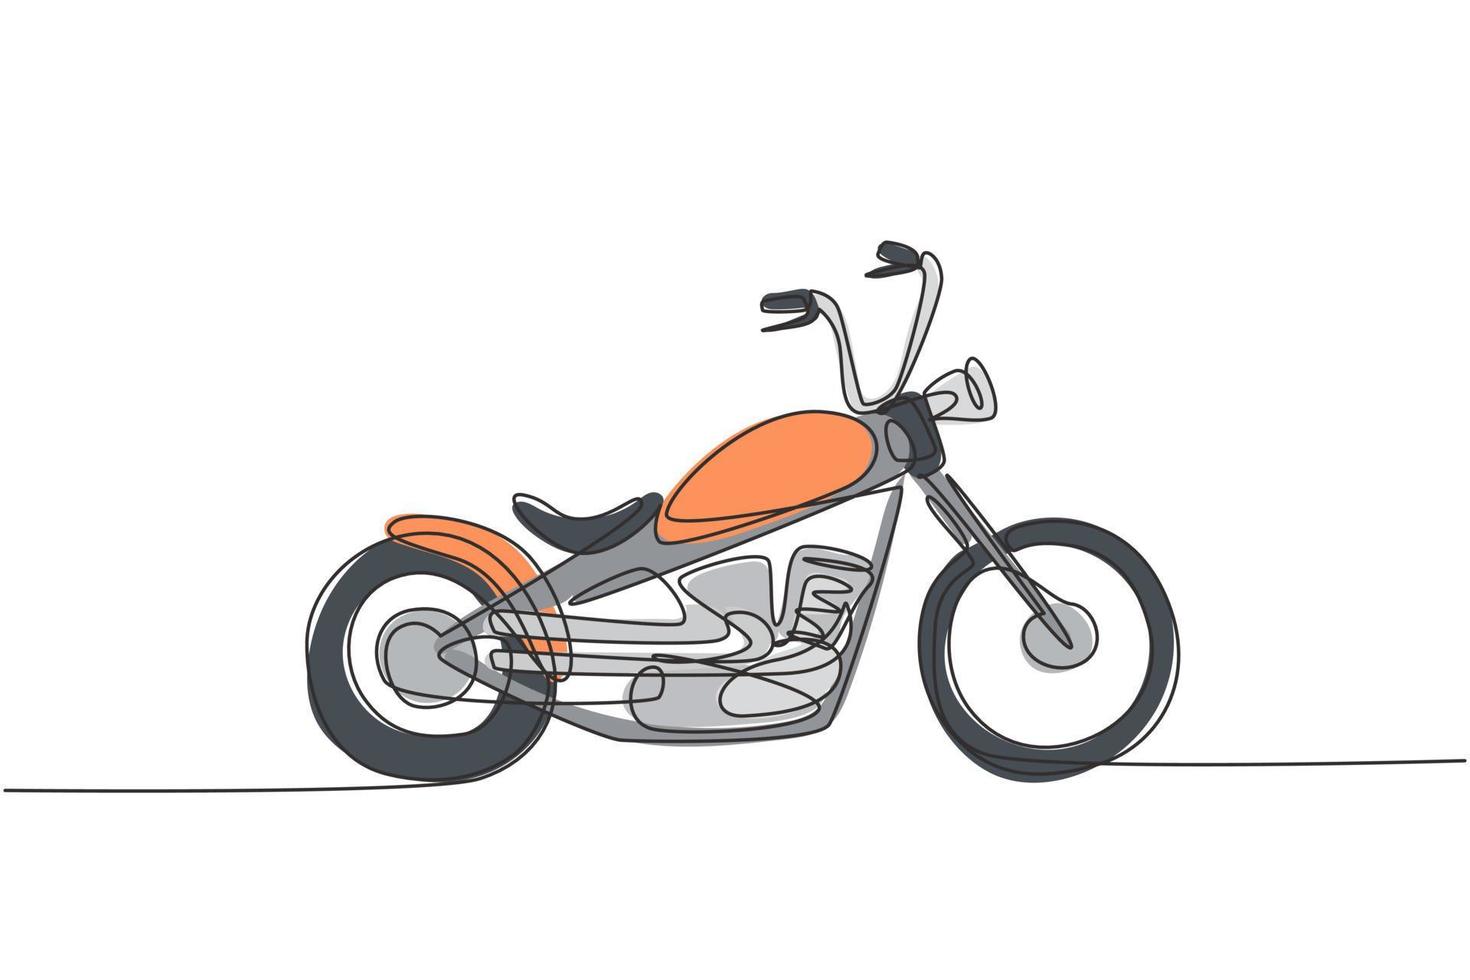 One continuous line drawing of retro old vintage chopper motorcycle icon. Classic motorbike transportation concept single line draw design vector graphic illustration